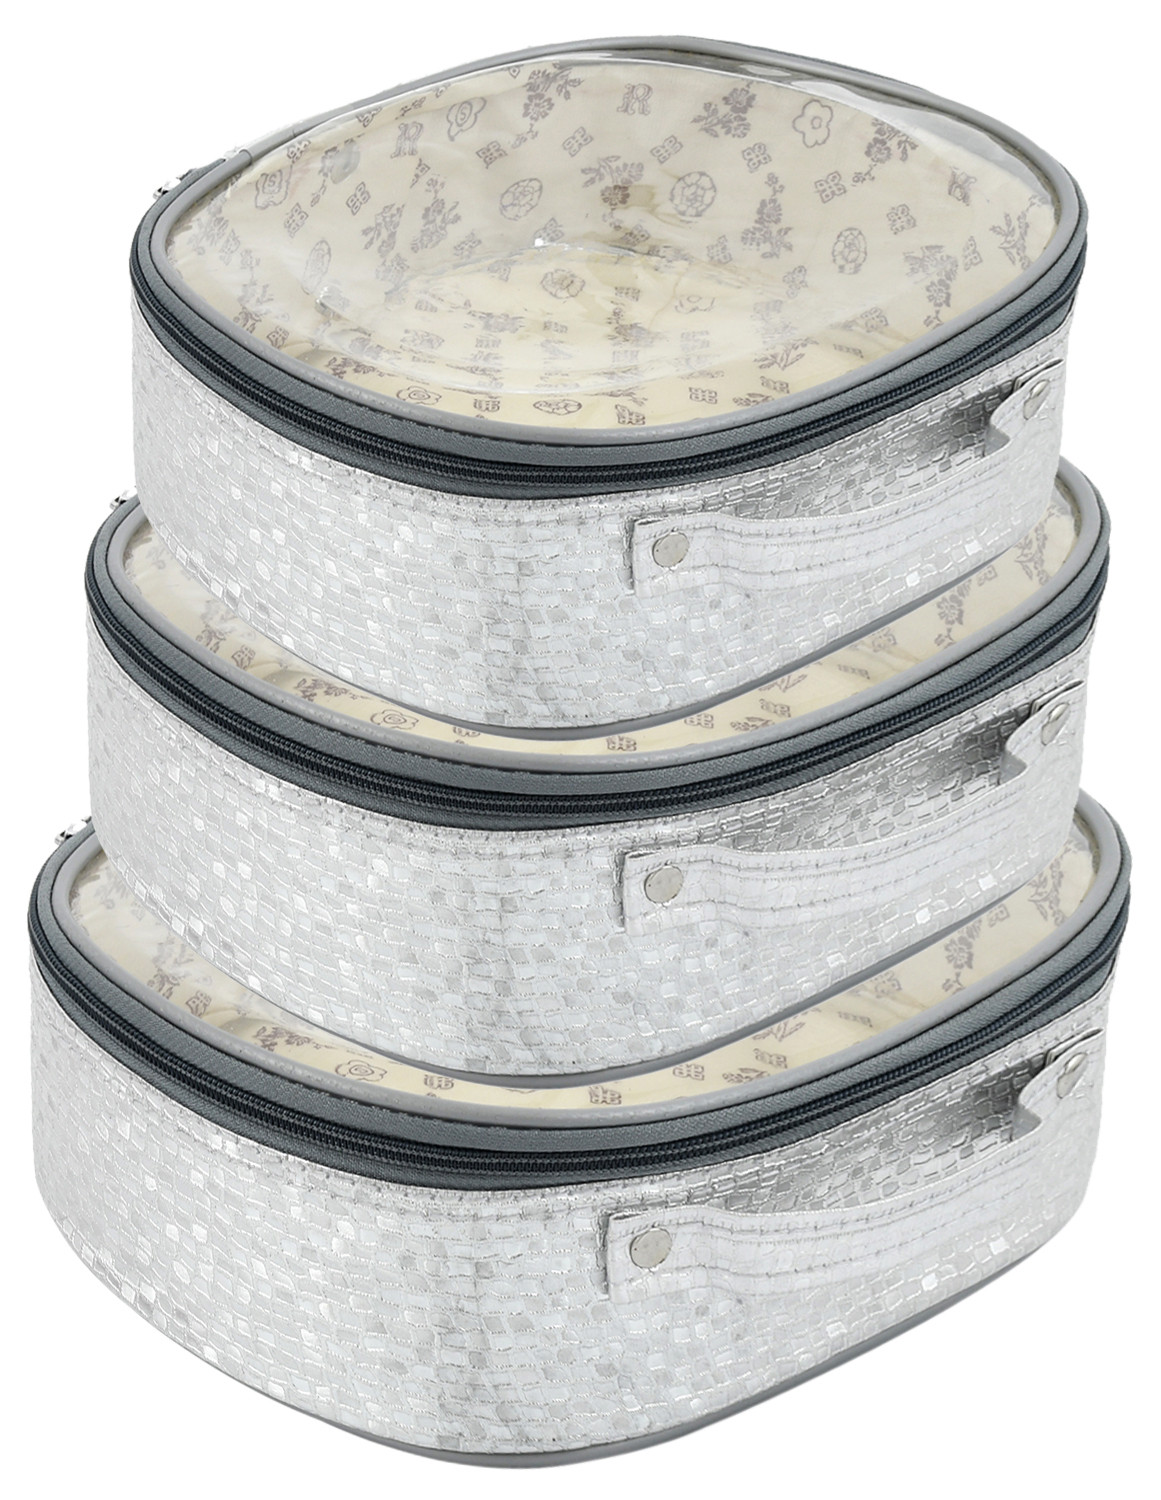 Kuber Industries Round Design Rexine 3 Pieces Make Up Jewellery Vanity Travelling Cosmetic Multipurpose Box (Silver), Collection -CTKTC38177